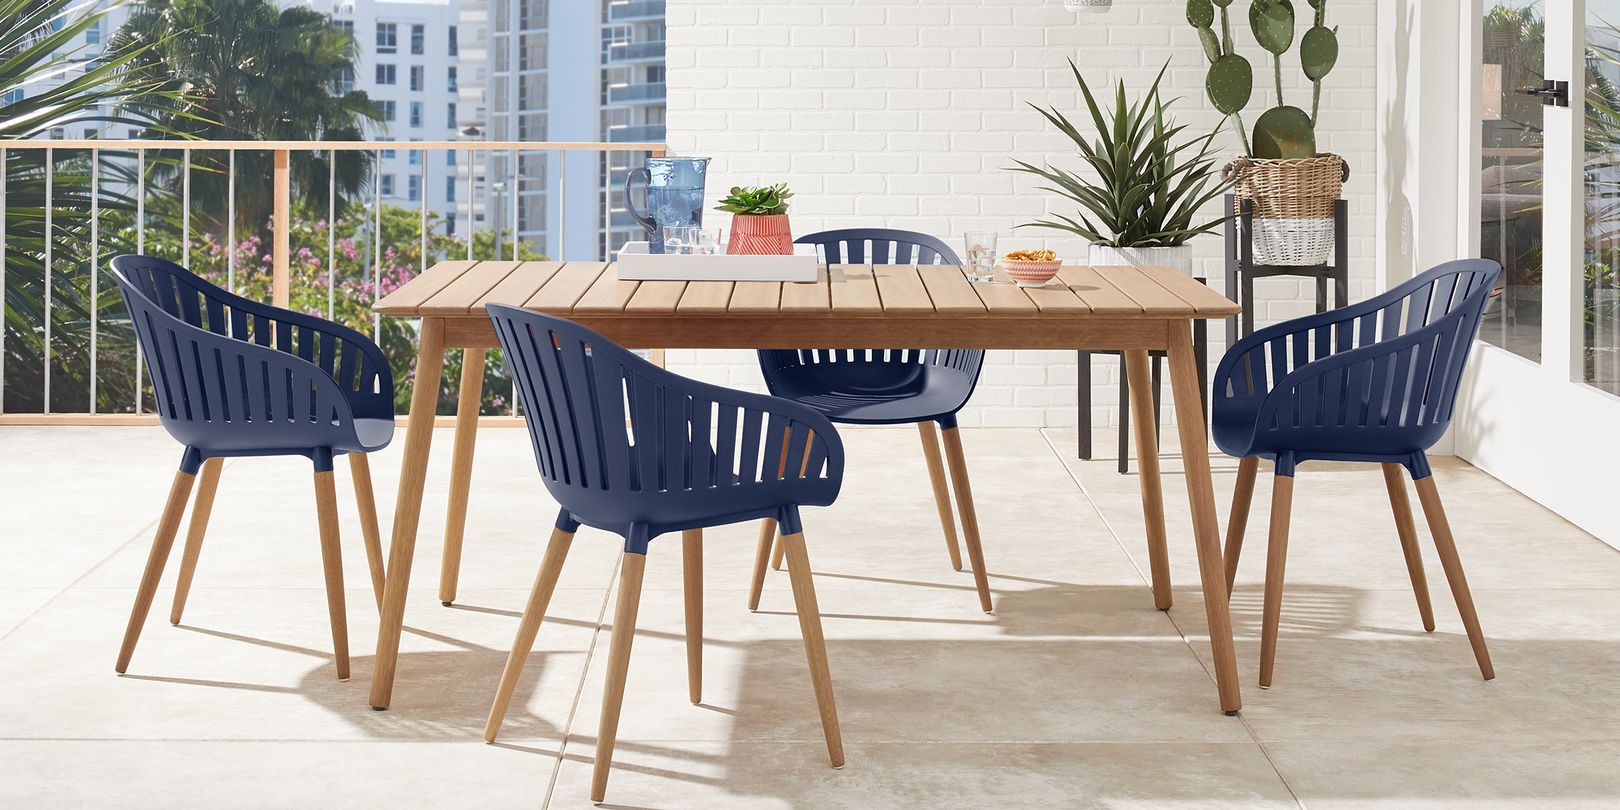 Photo of teak outdoor dining table with blue chairs